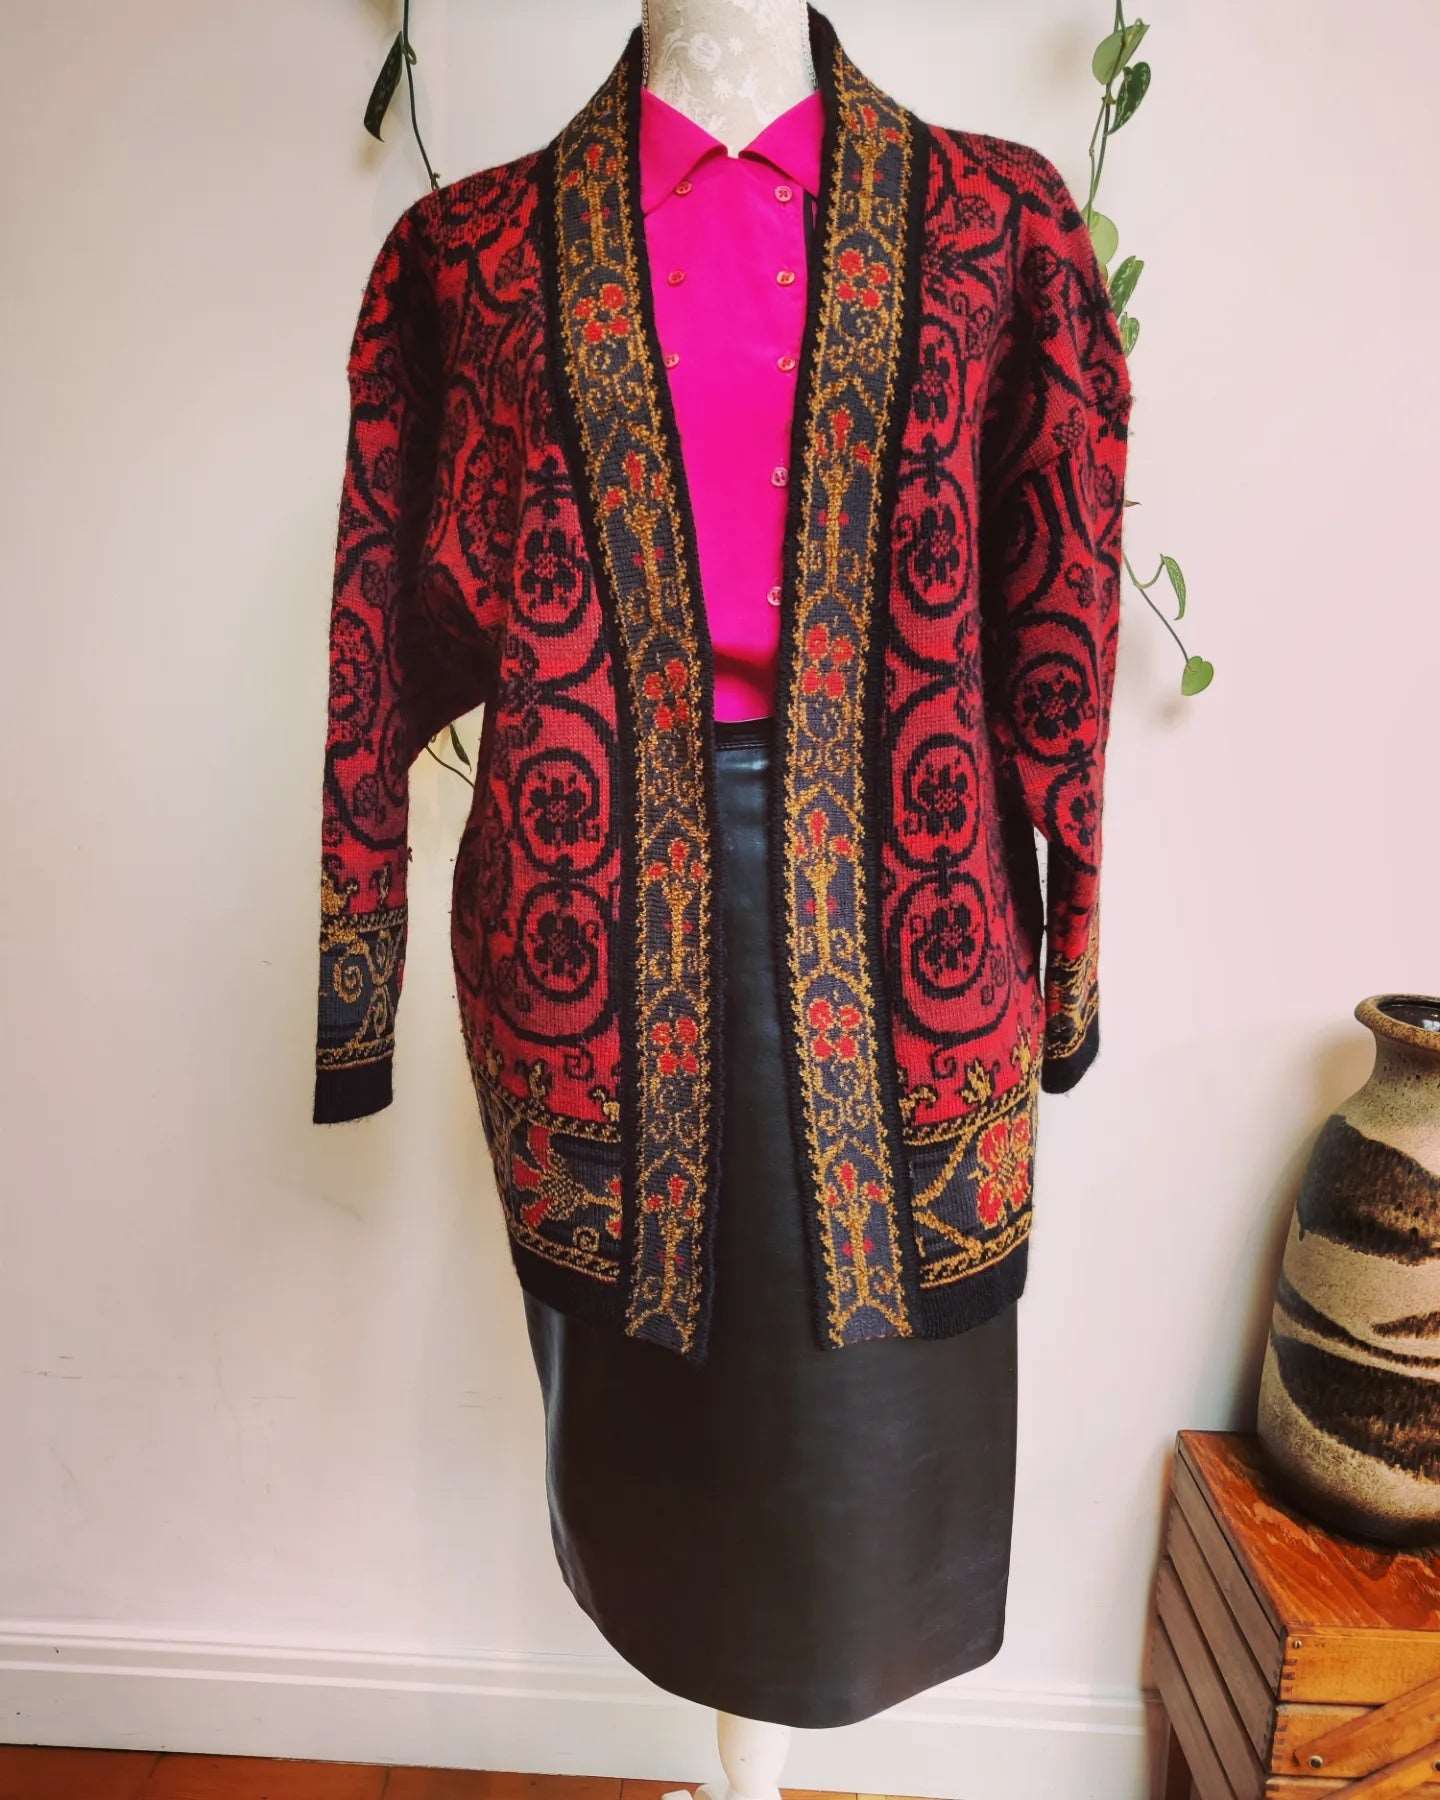 Vintage Past times cardigan in vibrant red wool.